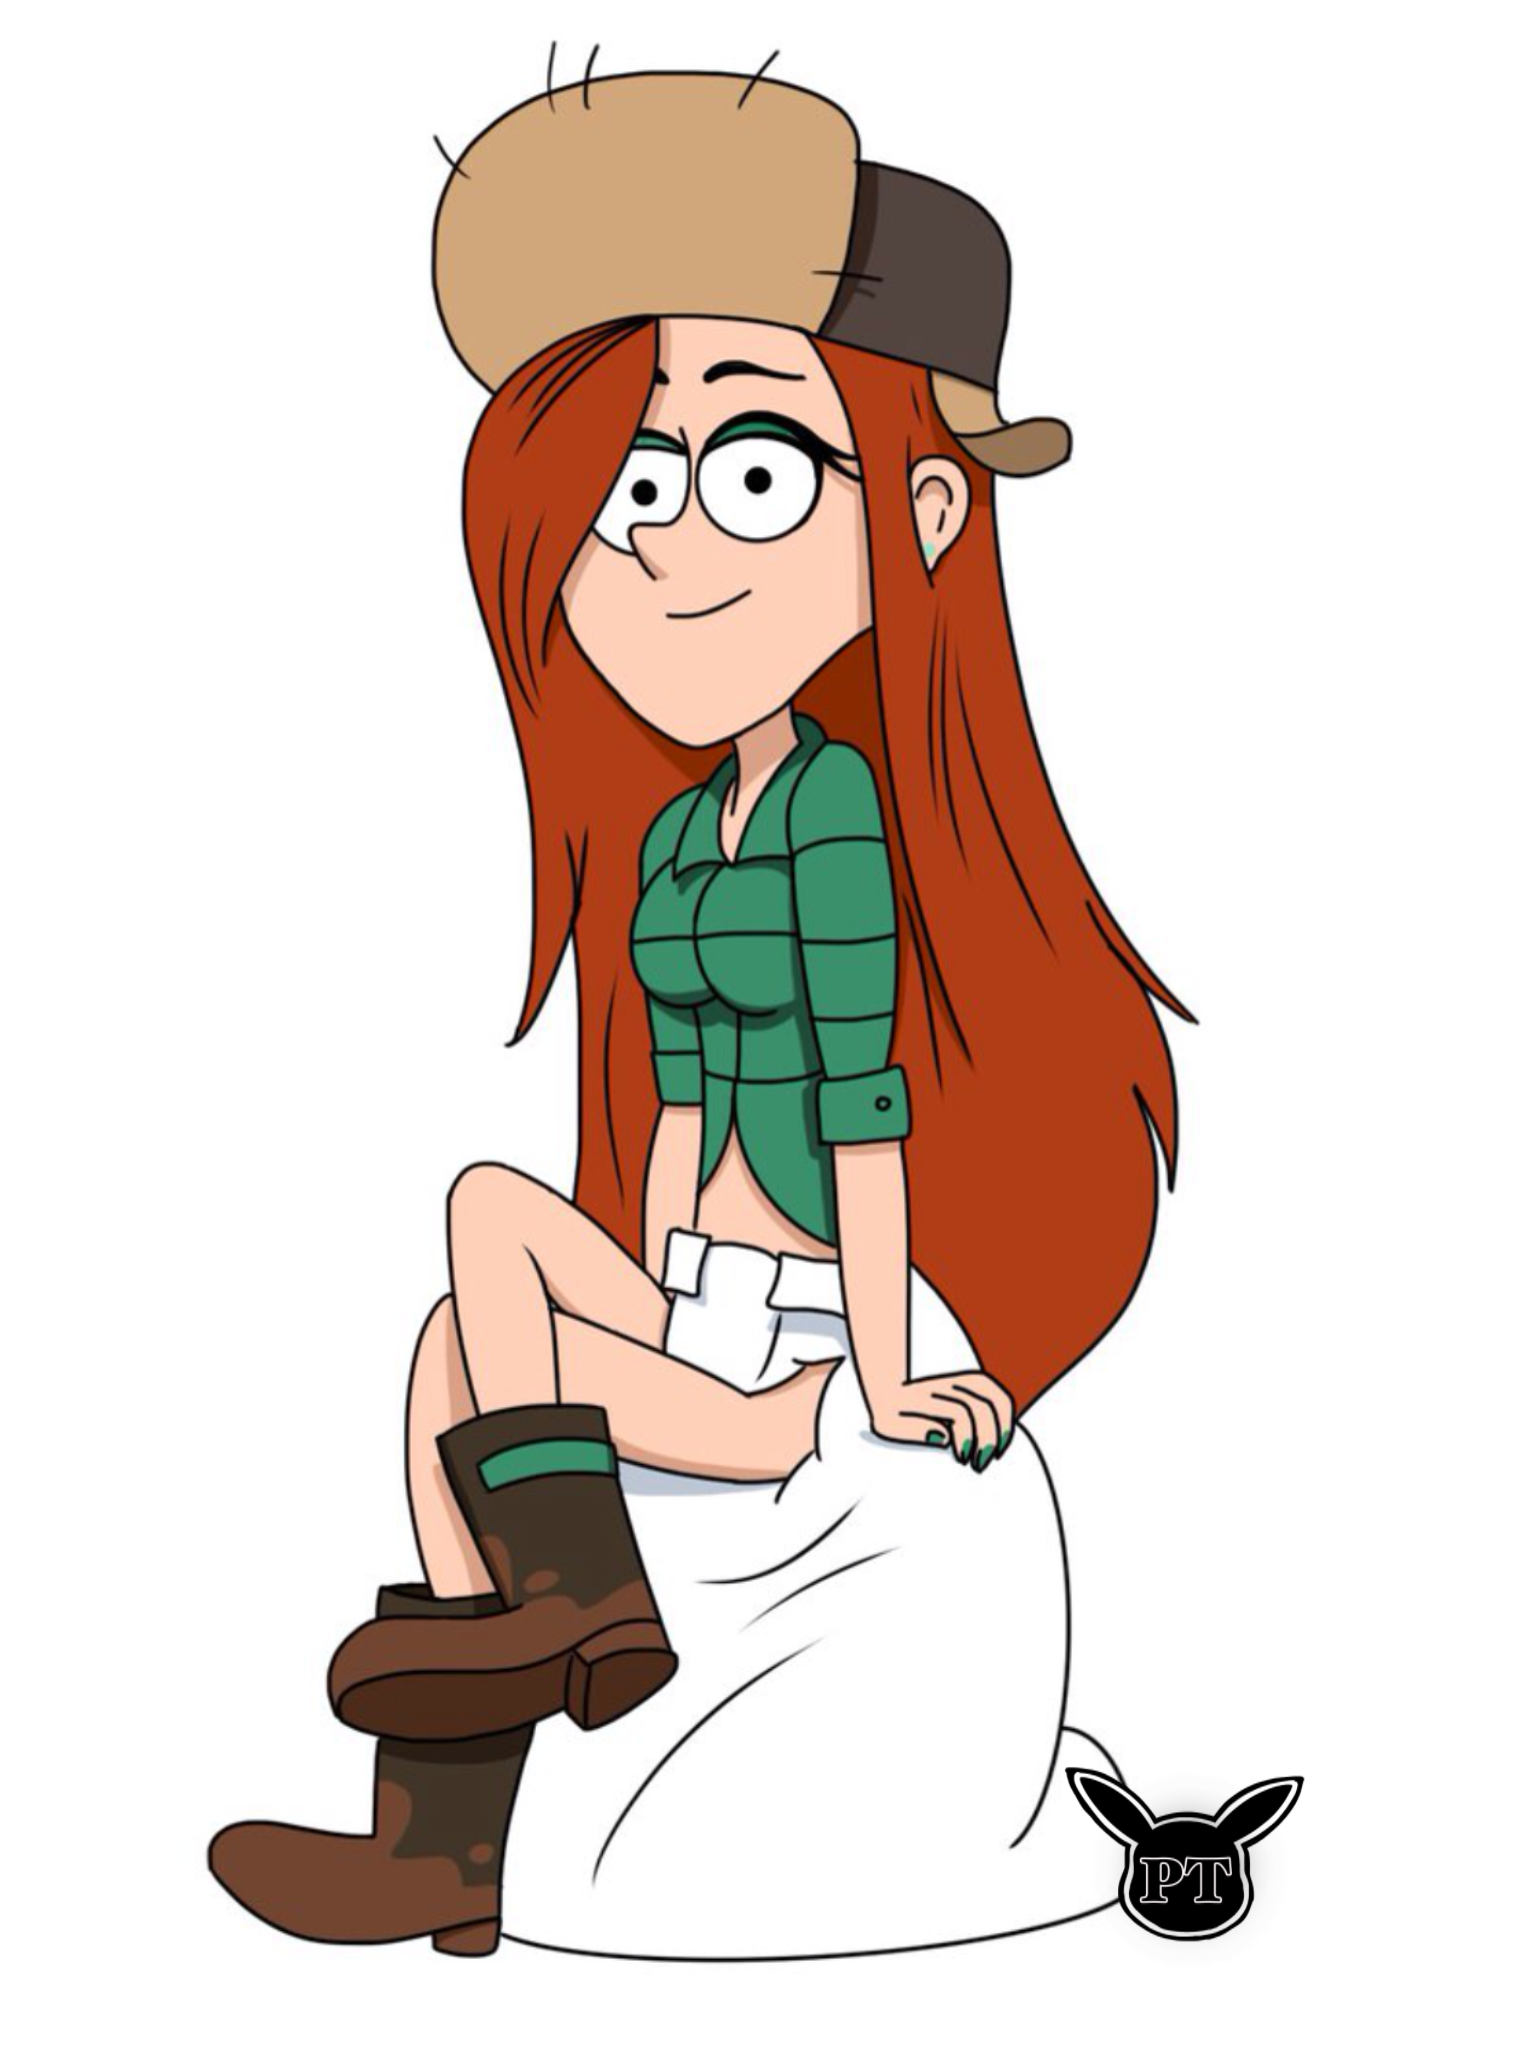 wee wendy and full sized wendy gravity falls art gravity falls cartoons c.....